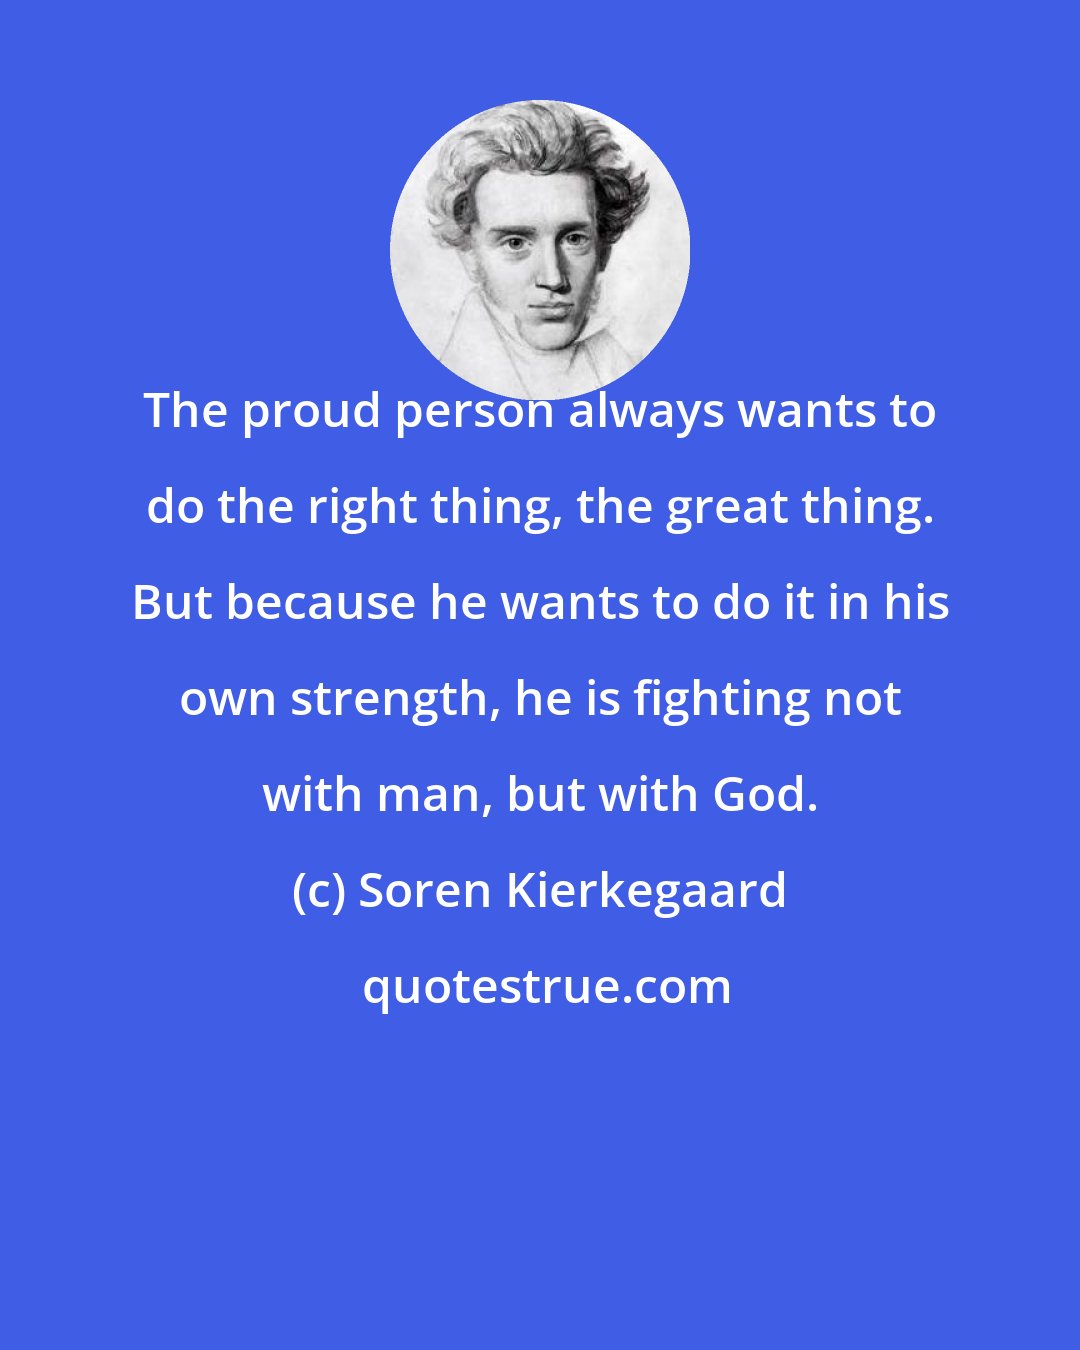 Soren Kierkegaard: The proud person always wants to do the right thing, the great thing. But because he wants to do it in his own strength, he is fighting not with man, but with God.